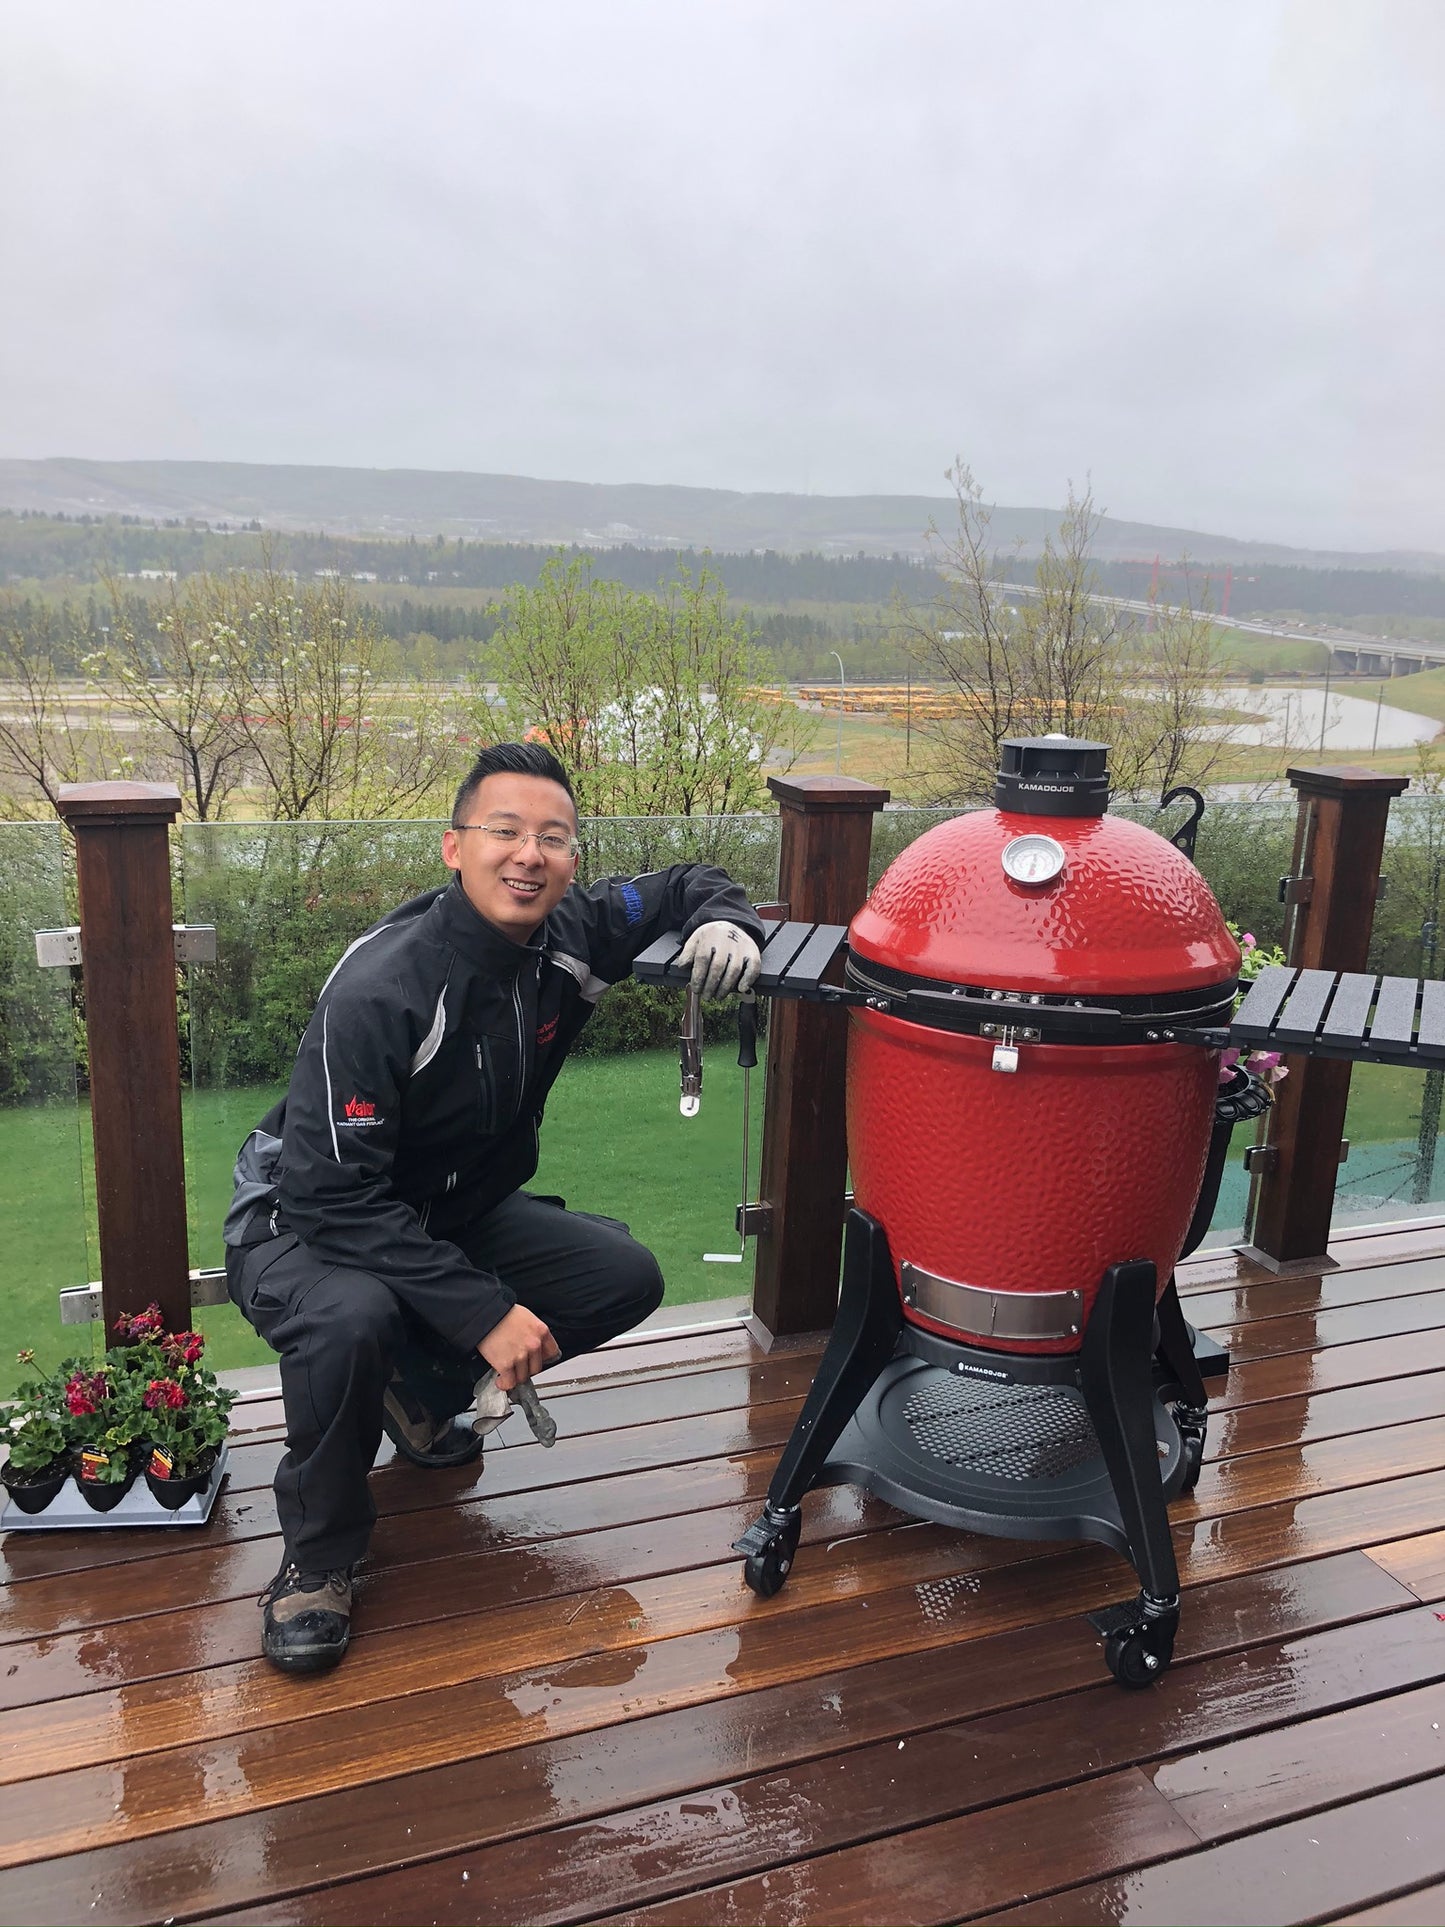 The Kamado Joe - Classic Joe III With Cart.  The perfect ceramic grill for summer time grilling. Available at Barbecues Galore: Burlington, Oakville, Etobicoke & Calgary